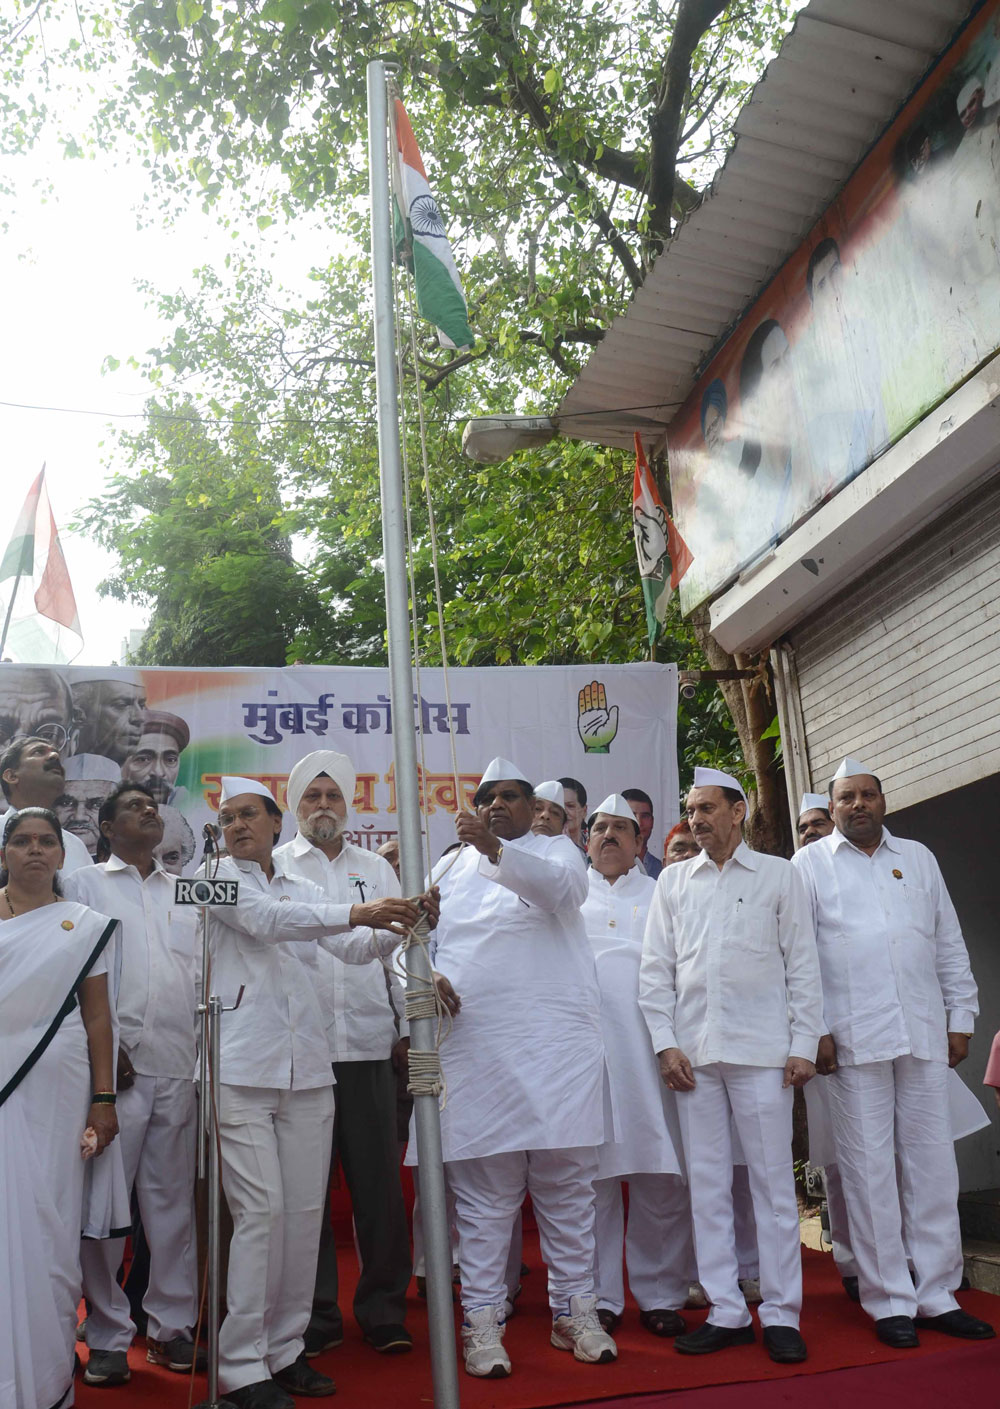 67th Anniversary of the Independence Day Celebration in Mumbai.